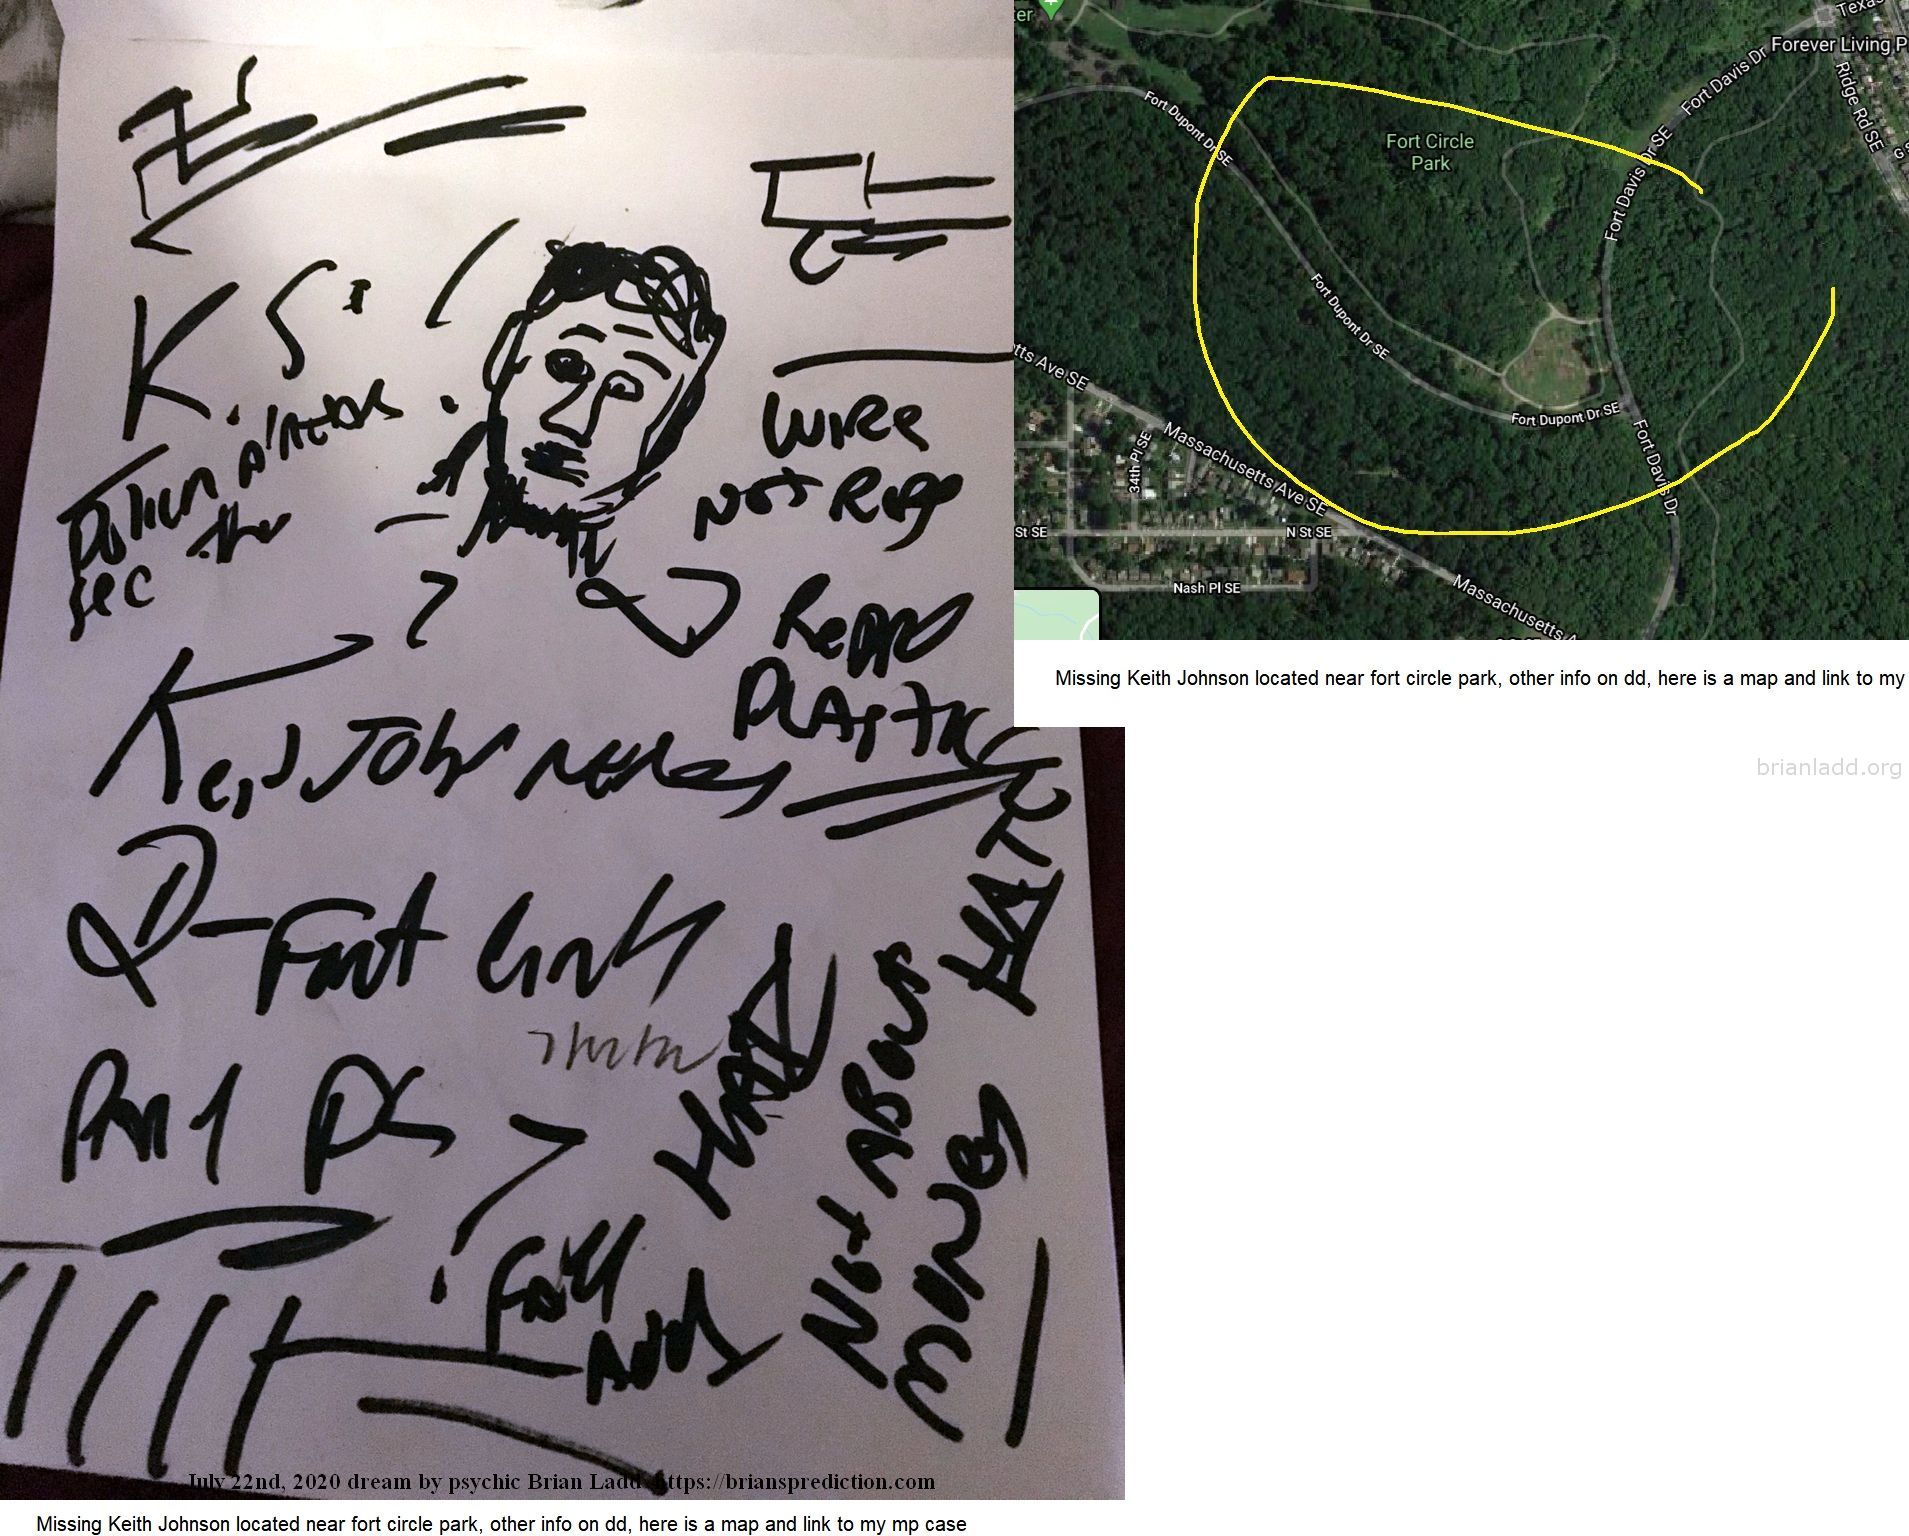 Missing Keith Johnson Located Near Fort Circle Park Other Info On Dd Here Is A Map And Link To My Mp Case 13358 22 July ...
Missing Keith Johnson Located Near Fort Circle Park, Other Info On Dd, Here Is A Map And Link To My Mp Case   https://briansprediction.com/Thumbnails.Php?Album=2510
